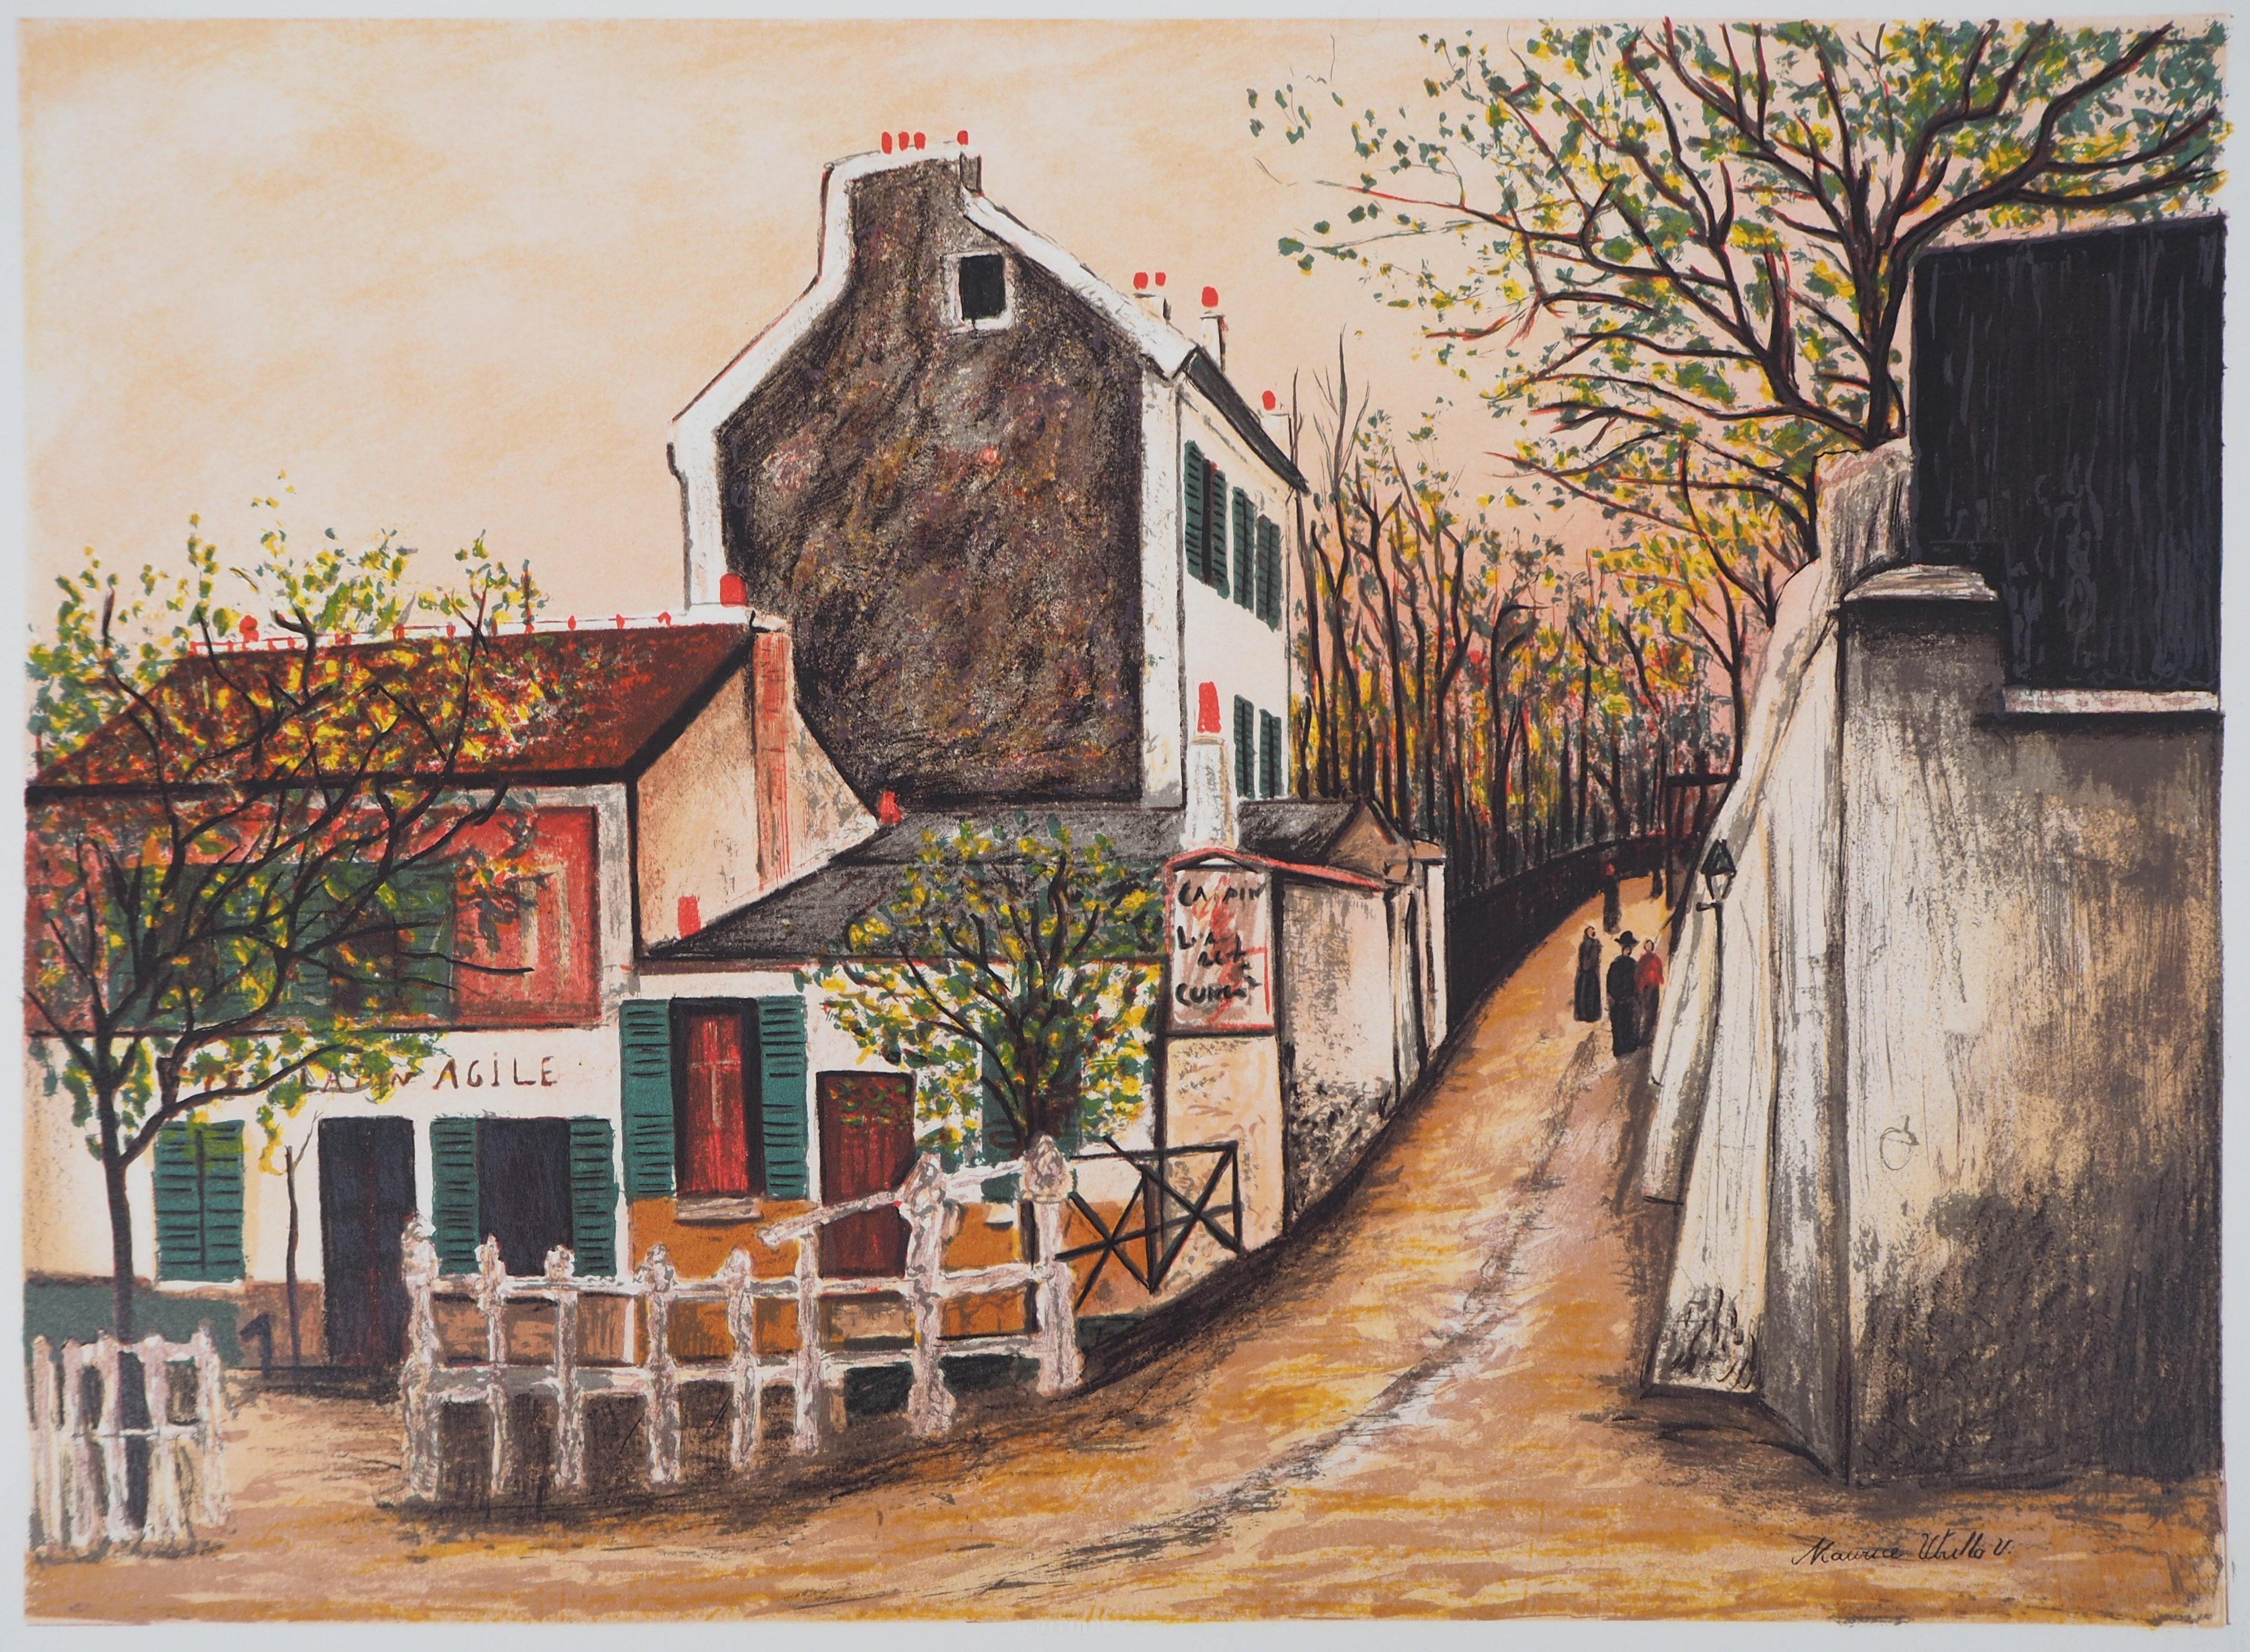 Paris : Street in Montmartre - Lithograph - Print by Maurice Utrillo